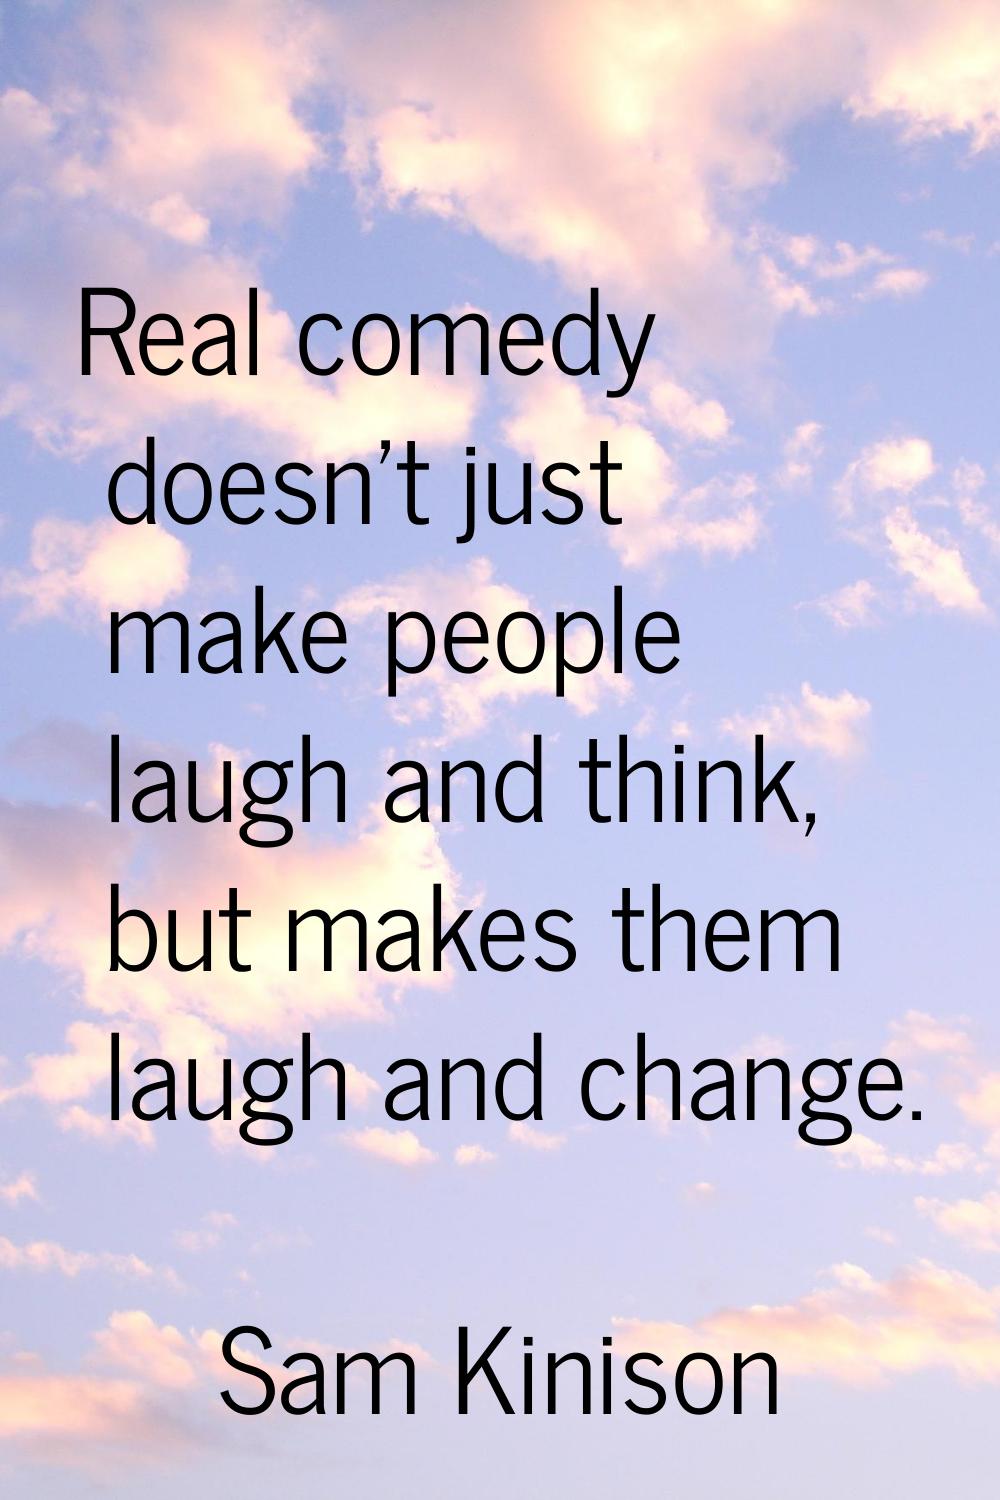 Real comedy doesn't just make people laugh and think, but makes them laugh and change.